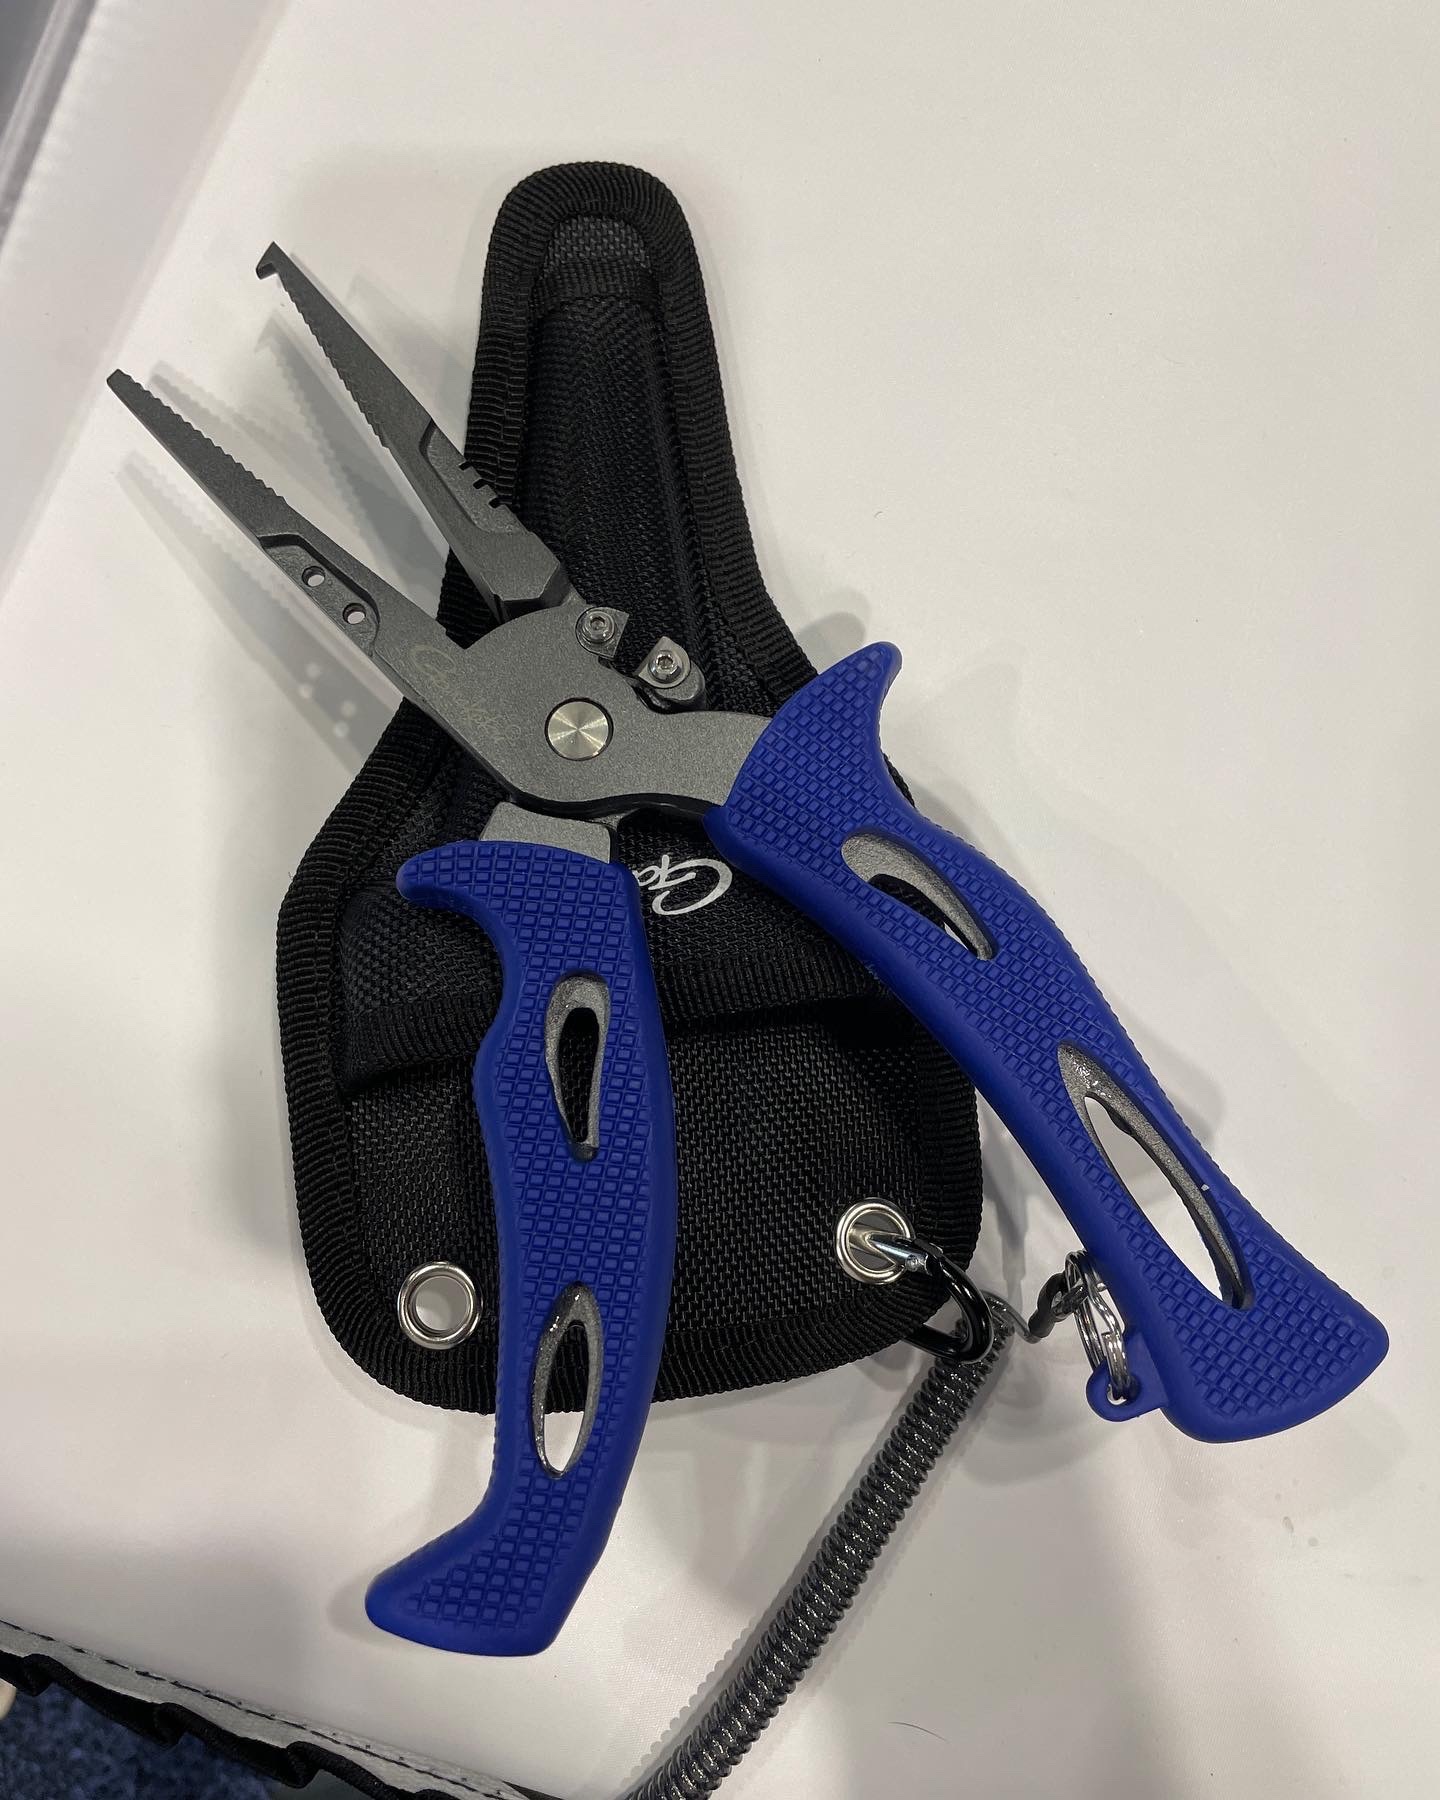 These multi-functional pliers by Gamakatsu were my favorites of many new products.